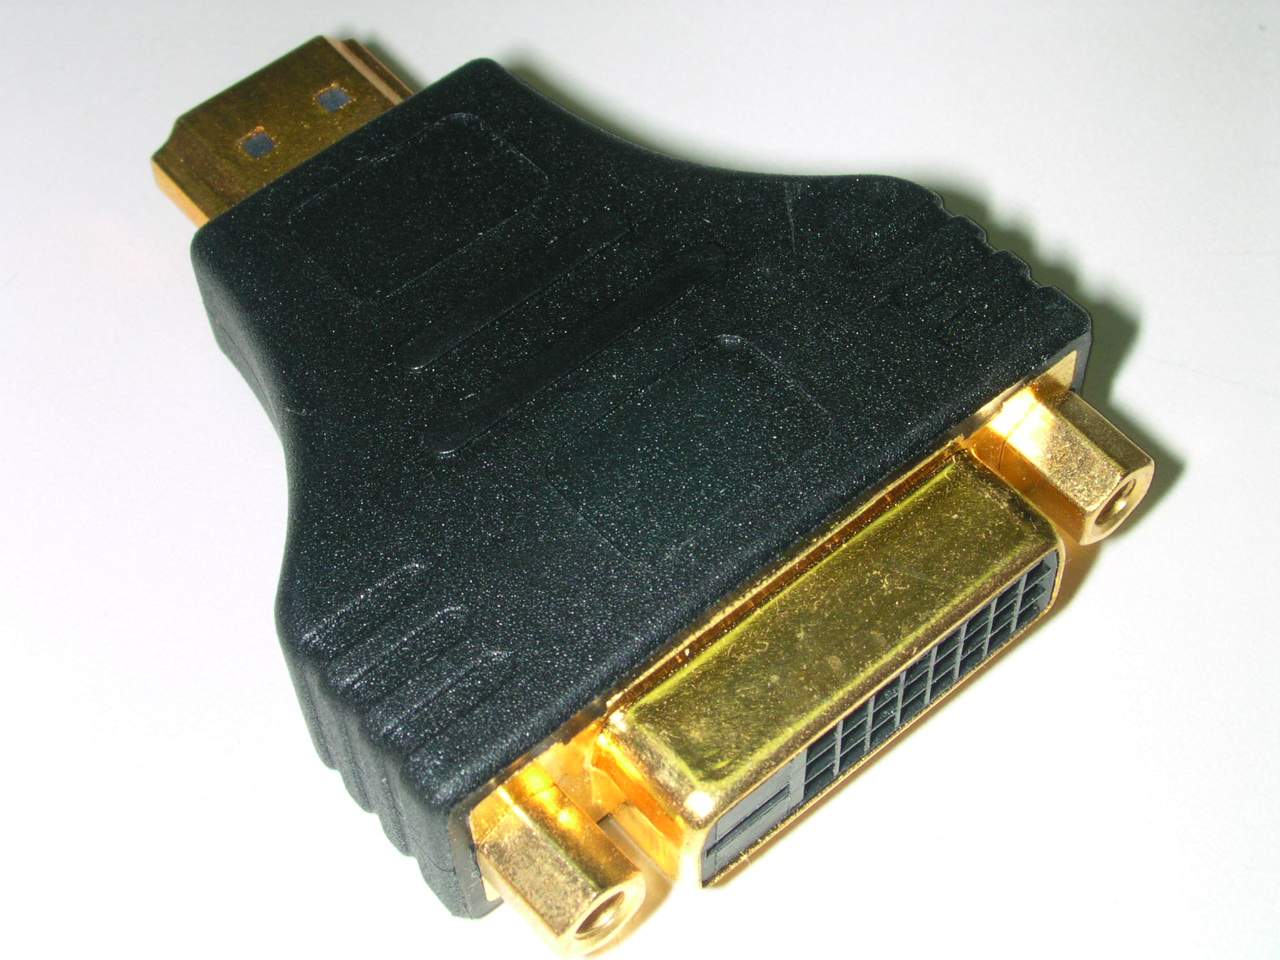 HDMI cable and connector at best quality and performance !